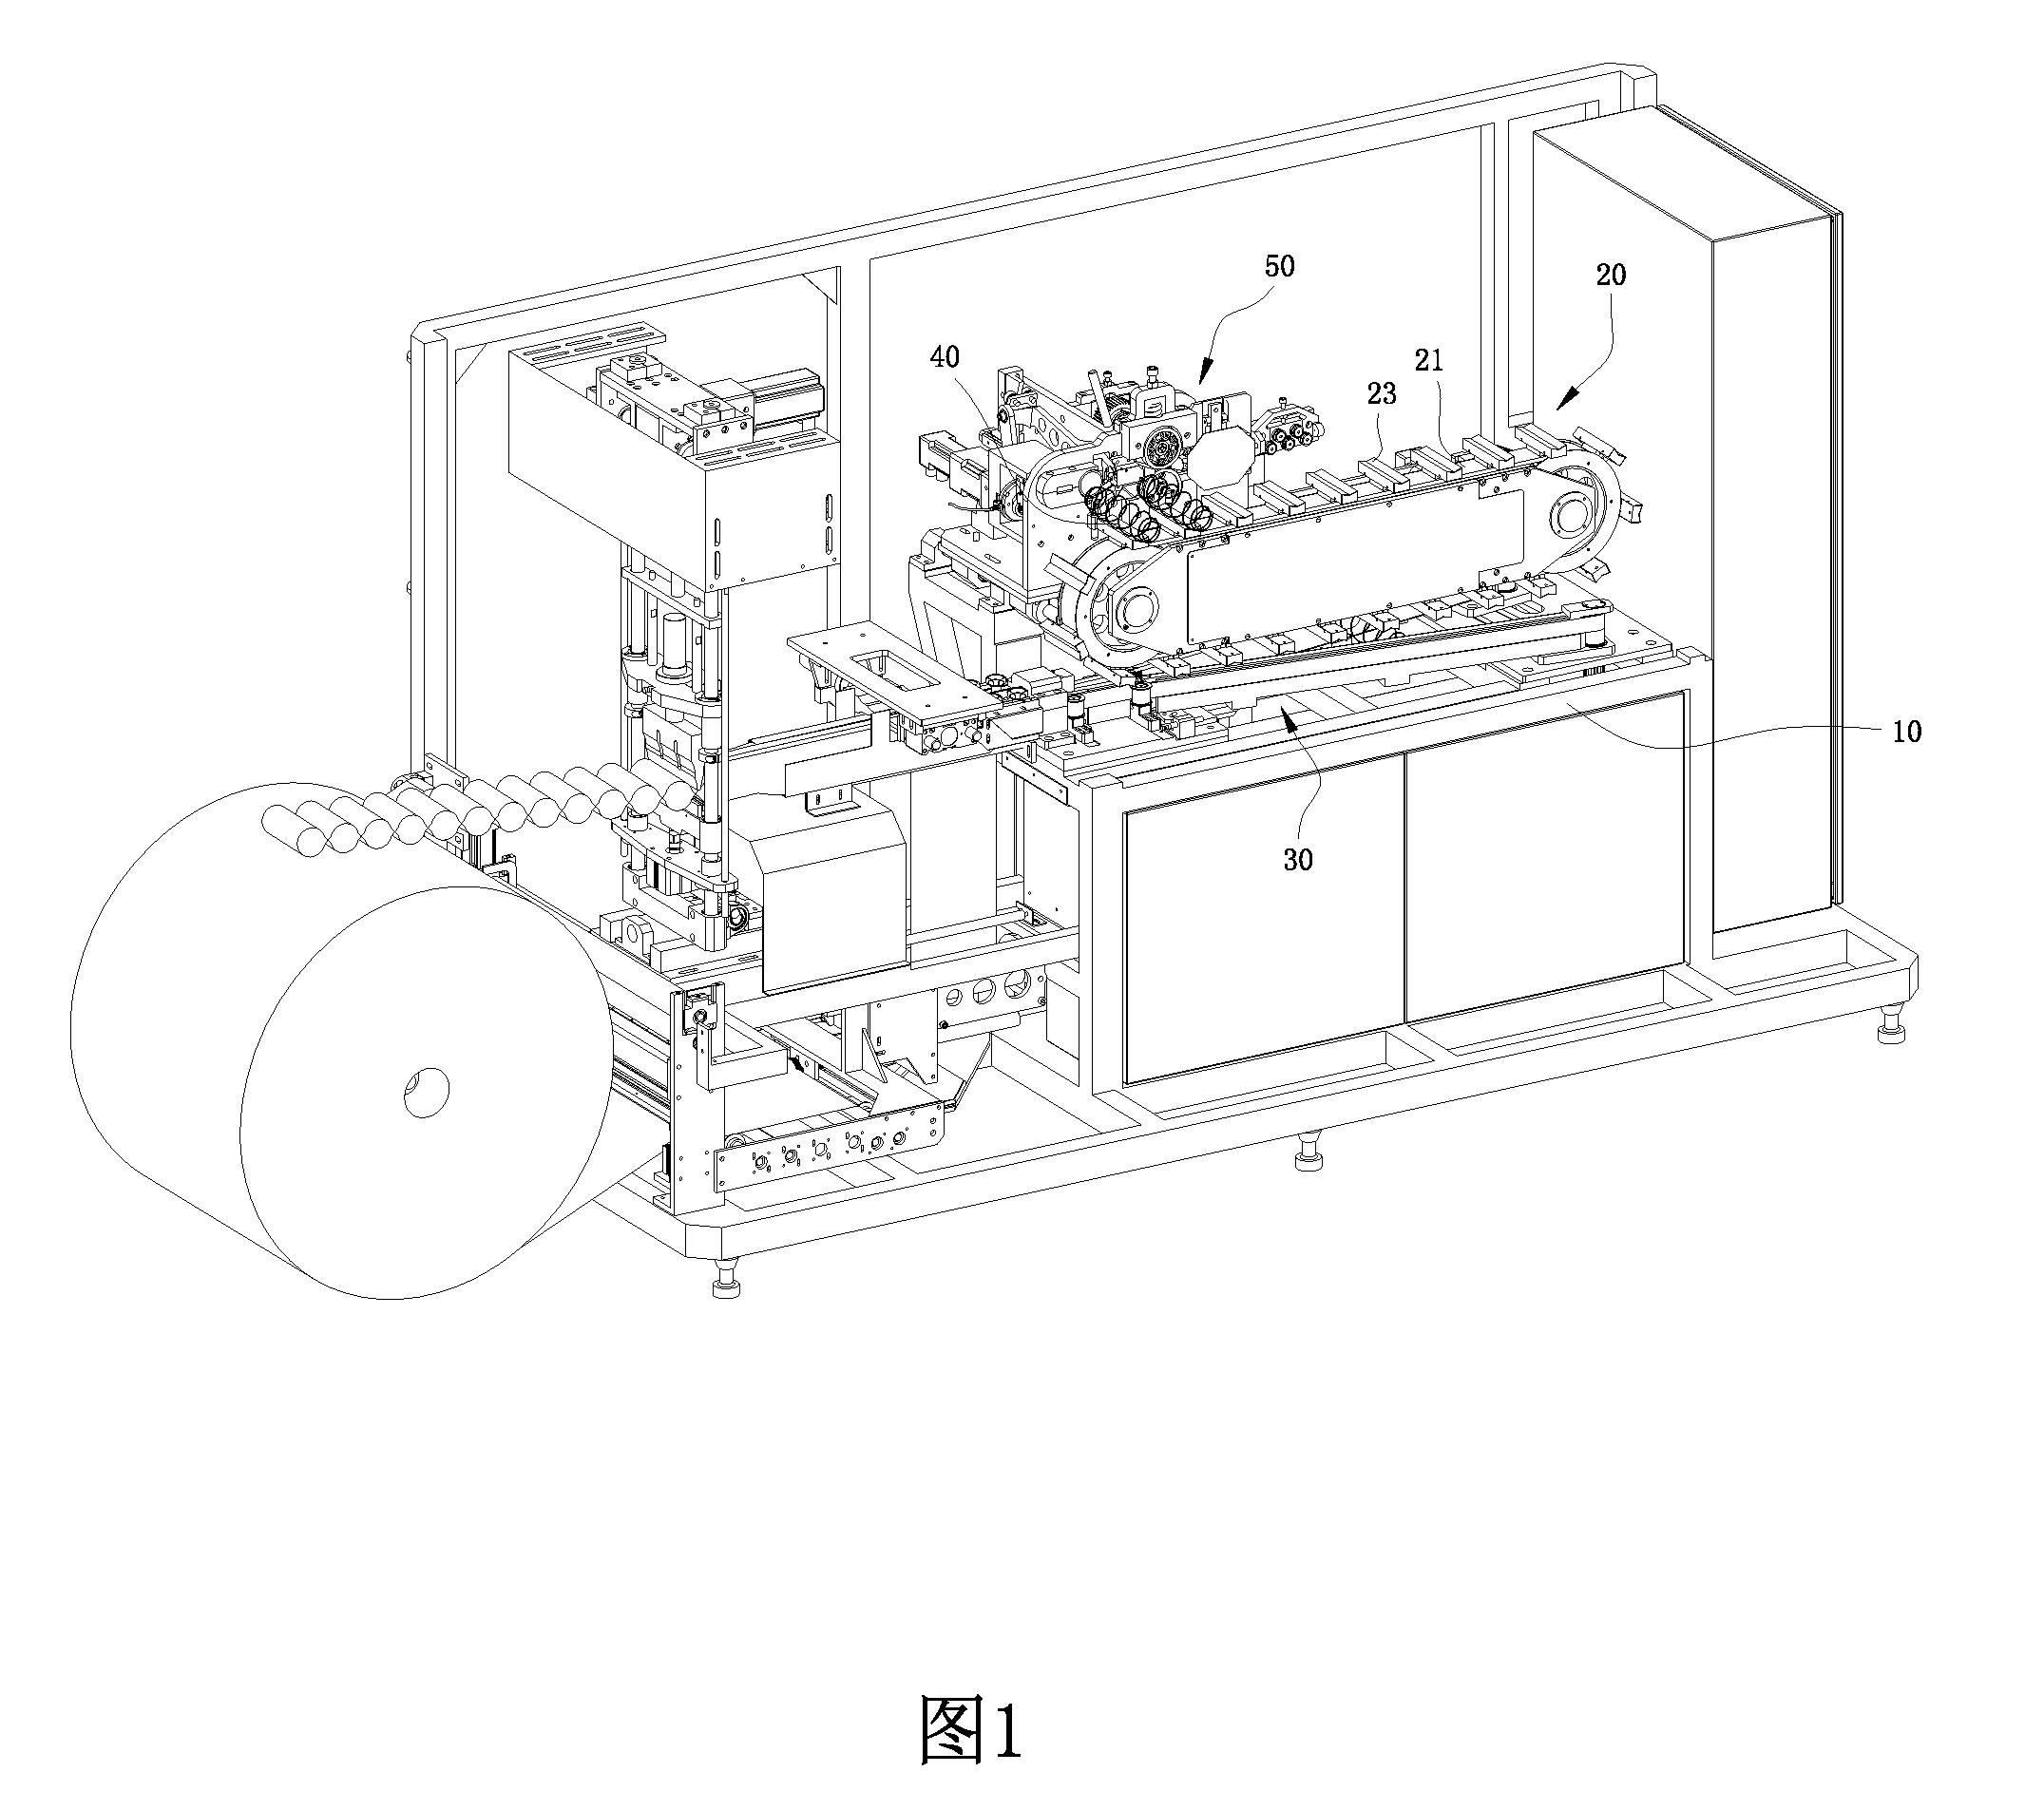 Compression Conveying Mechanism for Bagged Spring Production